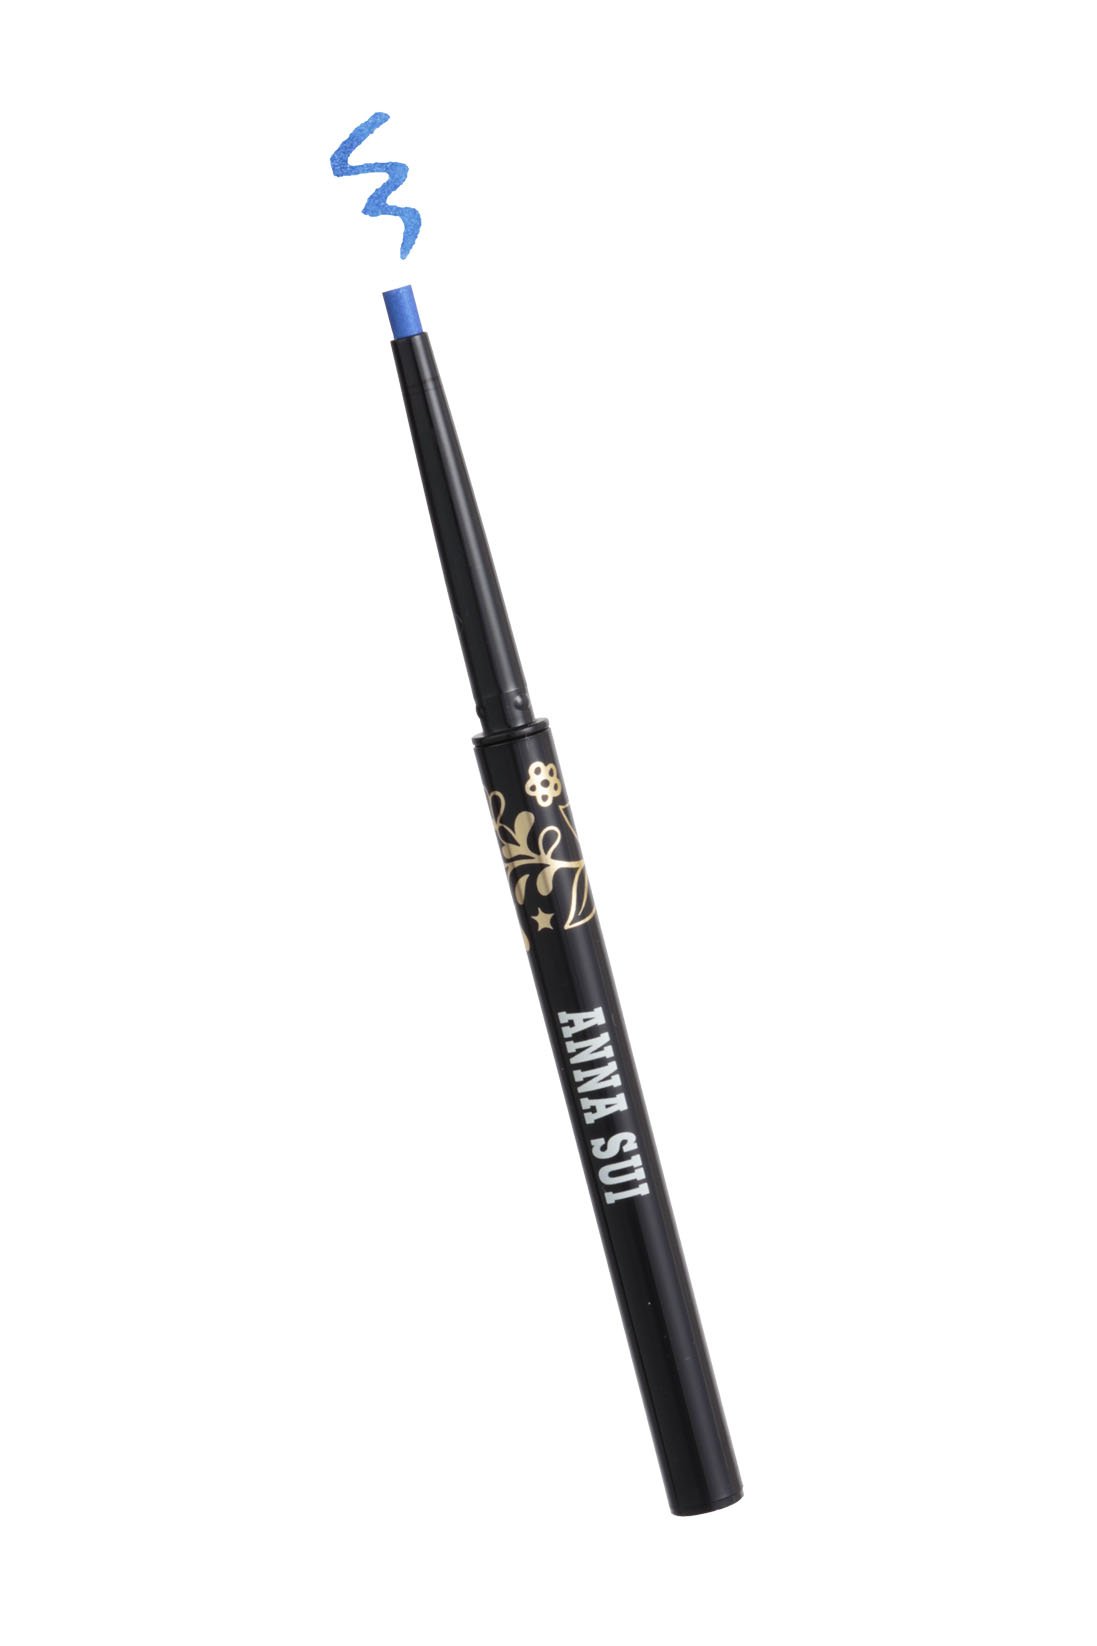 Open Neon Blue Eyeliner in a long cylindrical container, golden floral design, & white Anna Sui label